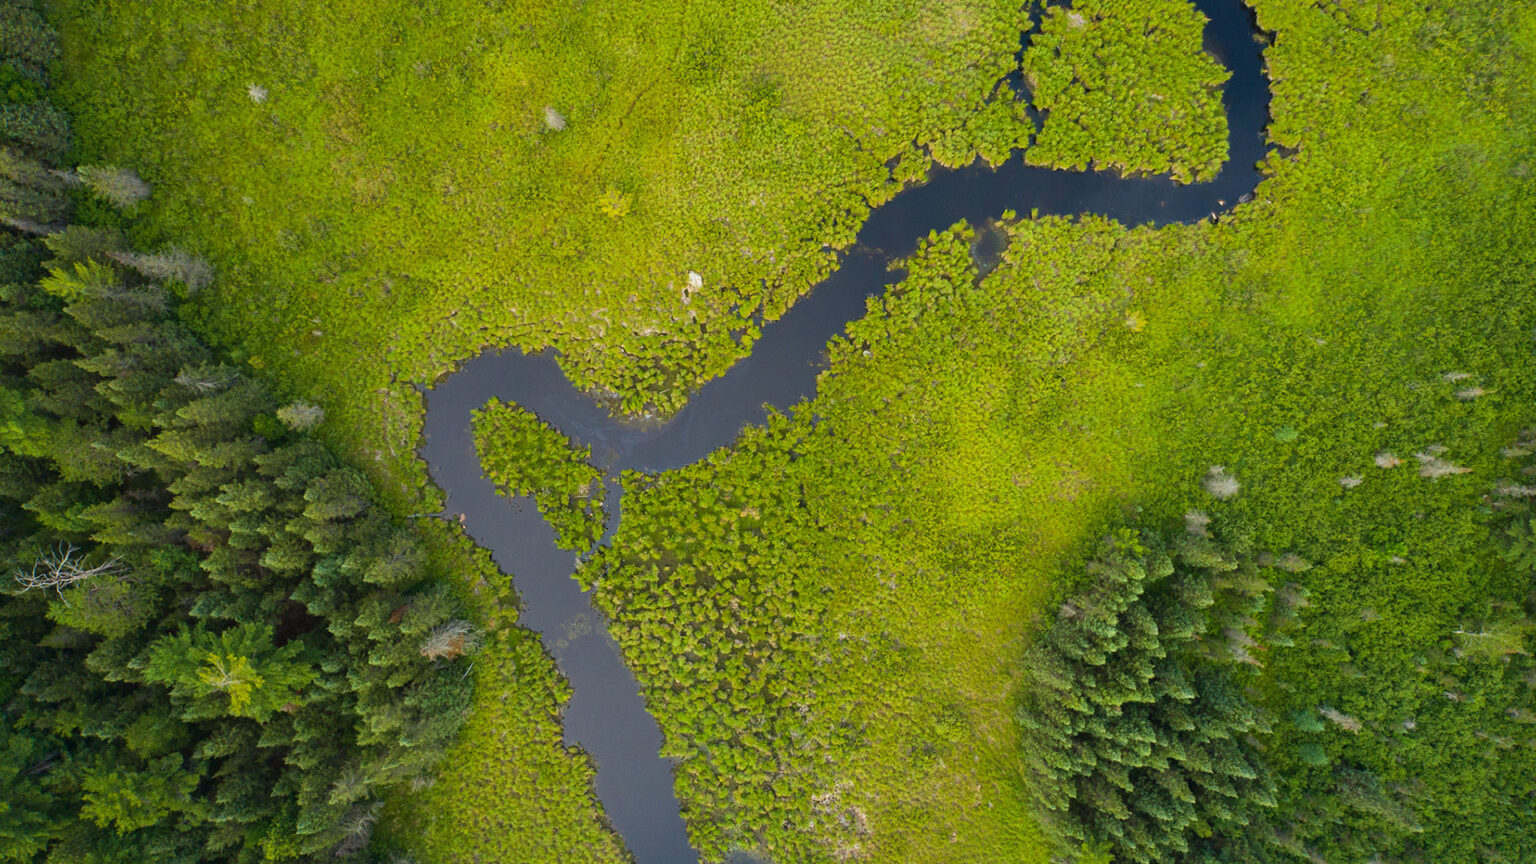 An aerial photo shows a stream course through wetlands, with conifer forests on either side.